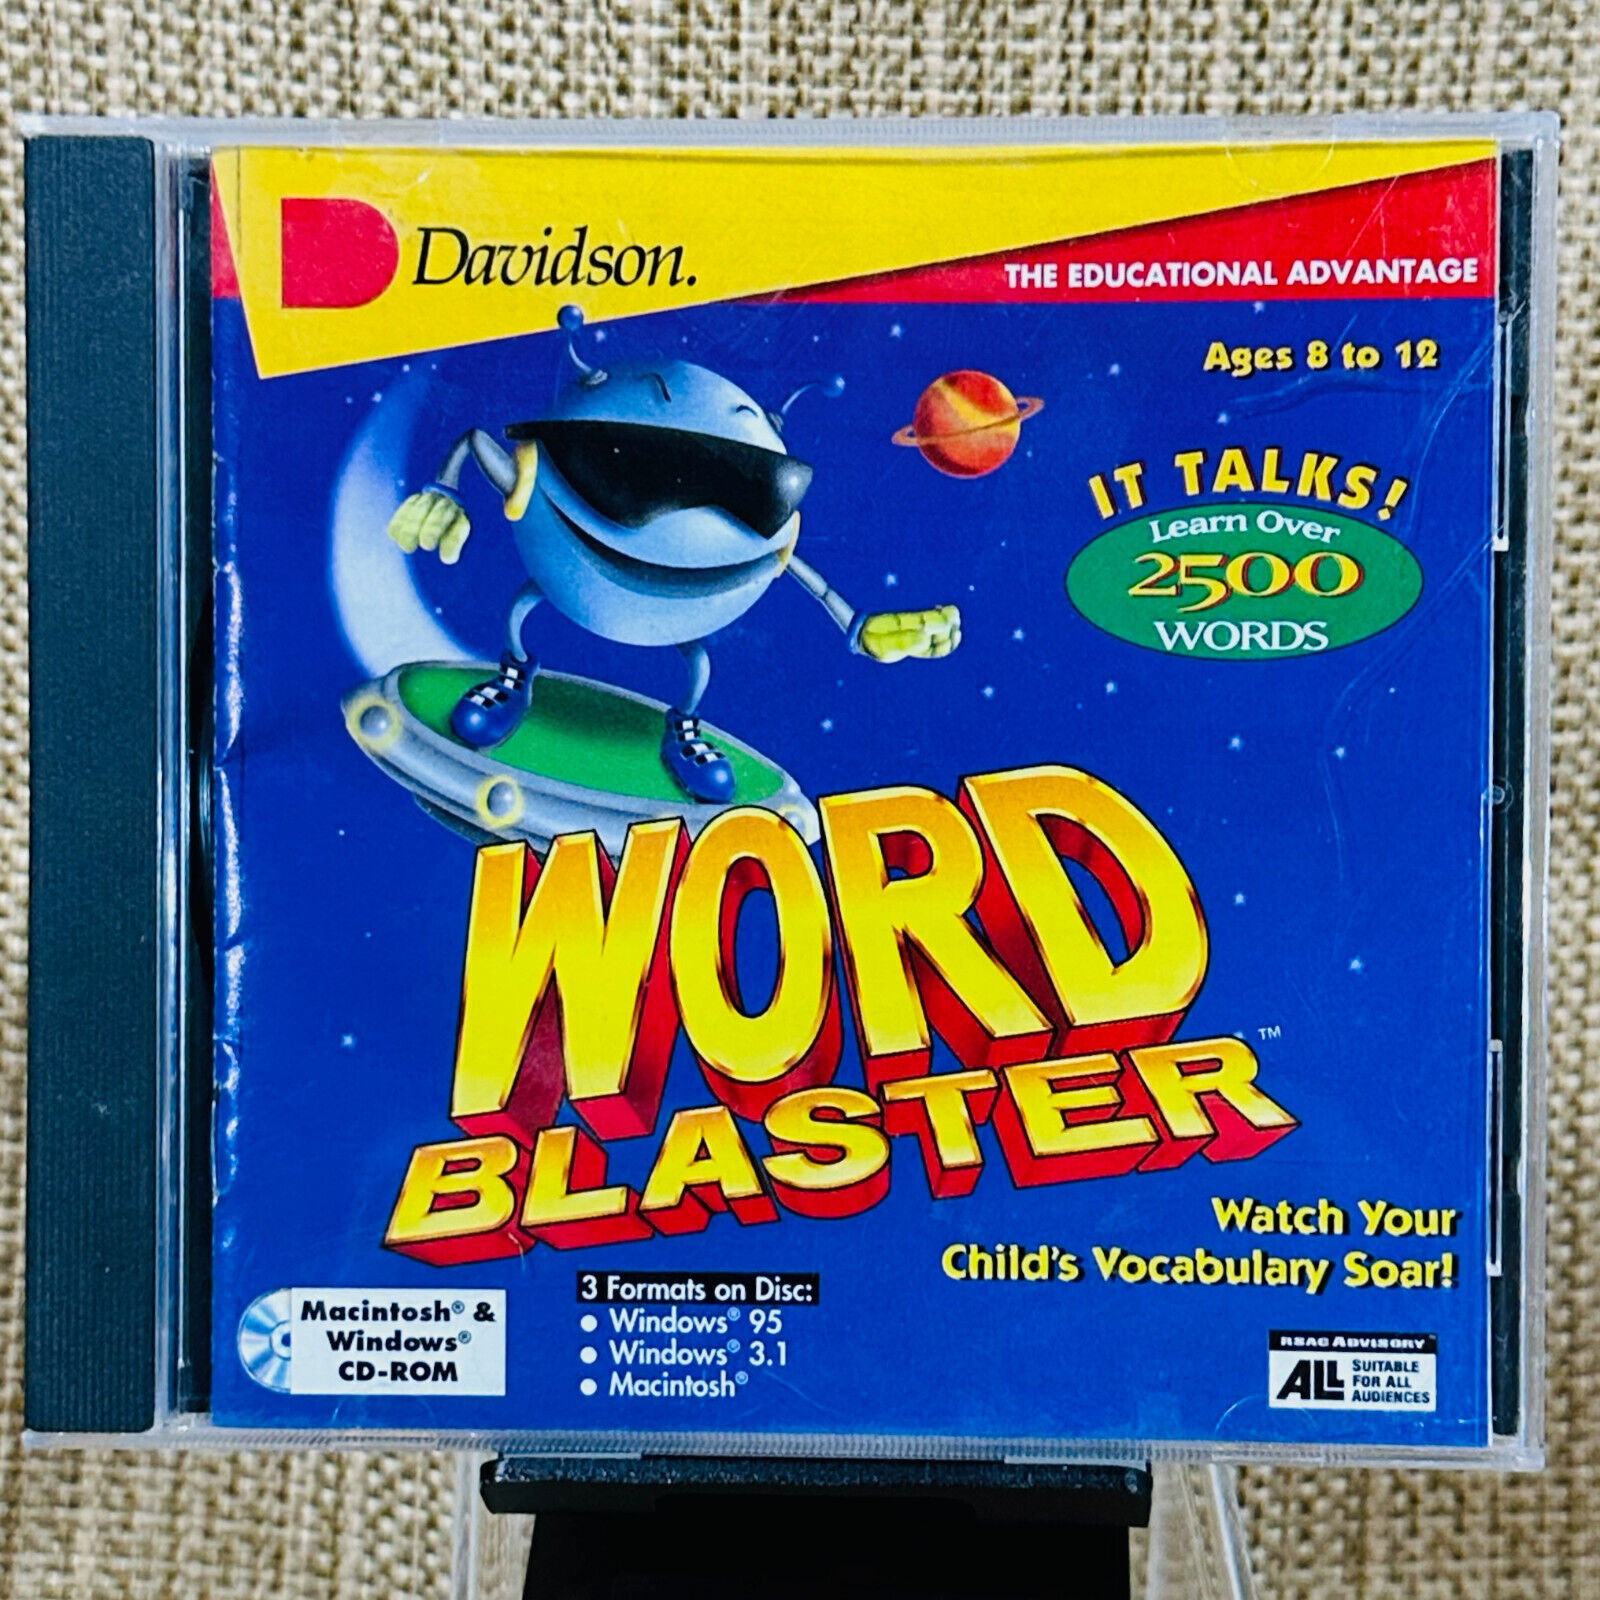 Word Blaster Vocabulary Enhancing Game Software for PC & MAC Ages 8-12